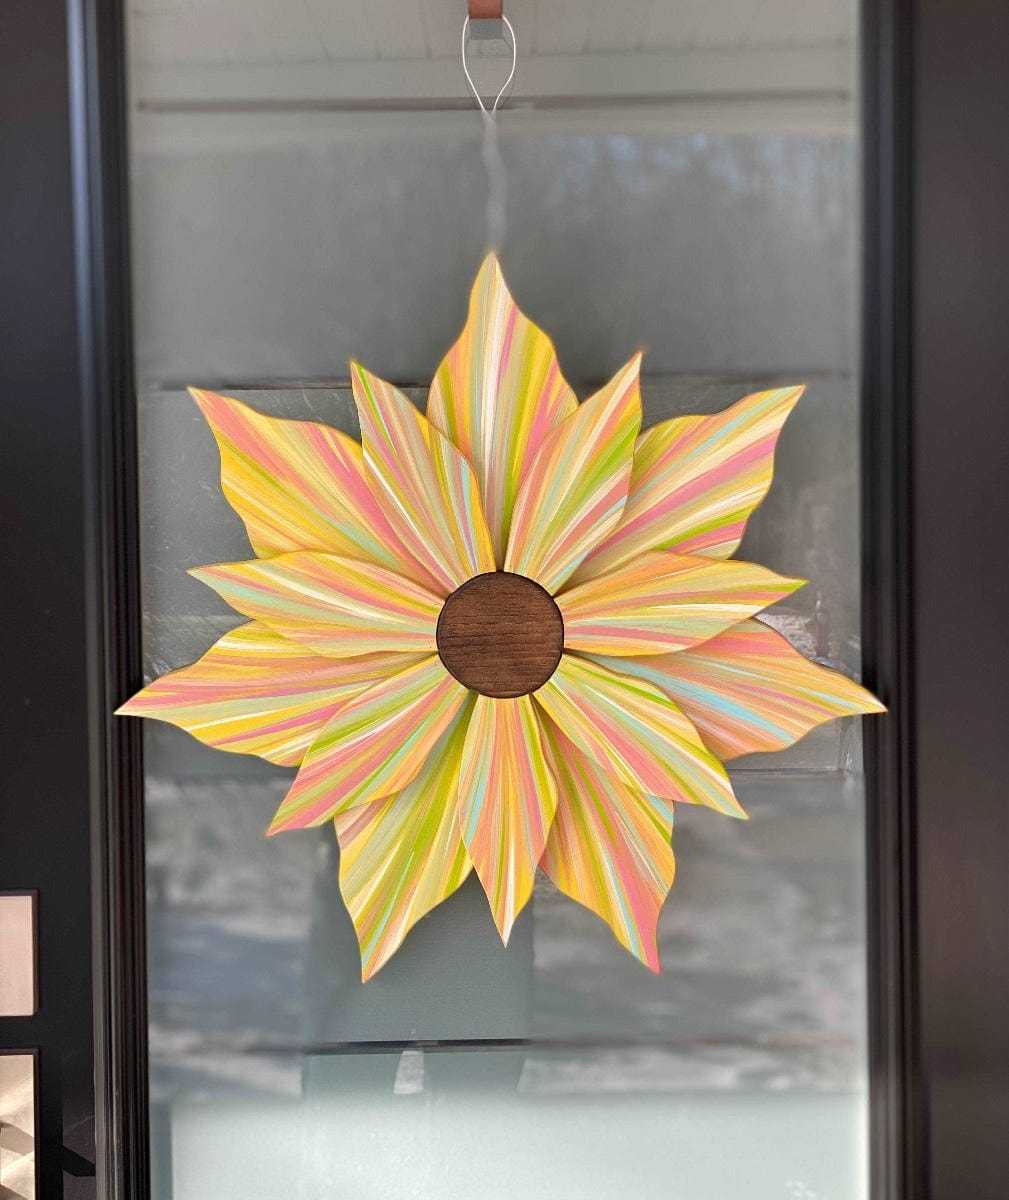 Atlantic Wood N Wares Home & Garden>Home Décor>Wall Decor>Wall Hangings 22 inches Handcrafted Love Flower Door Decoration for All Seasons